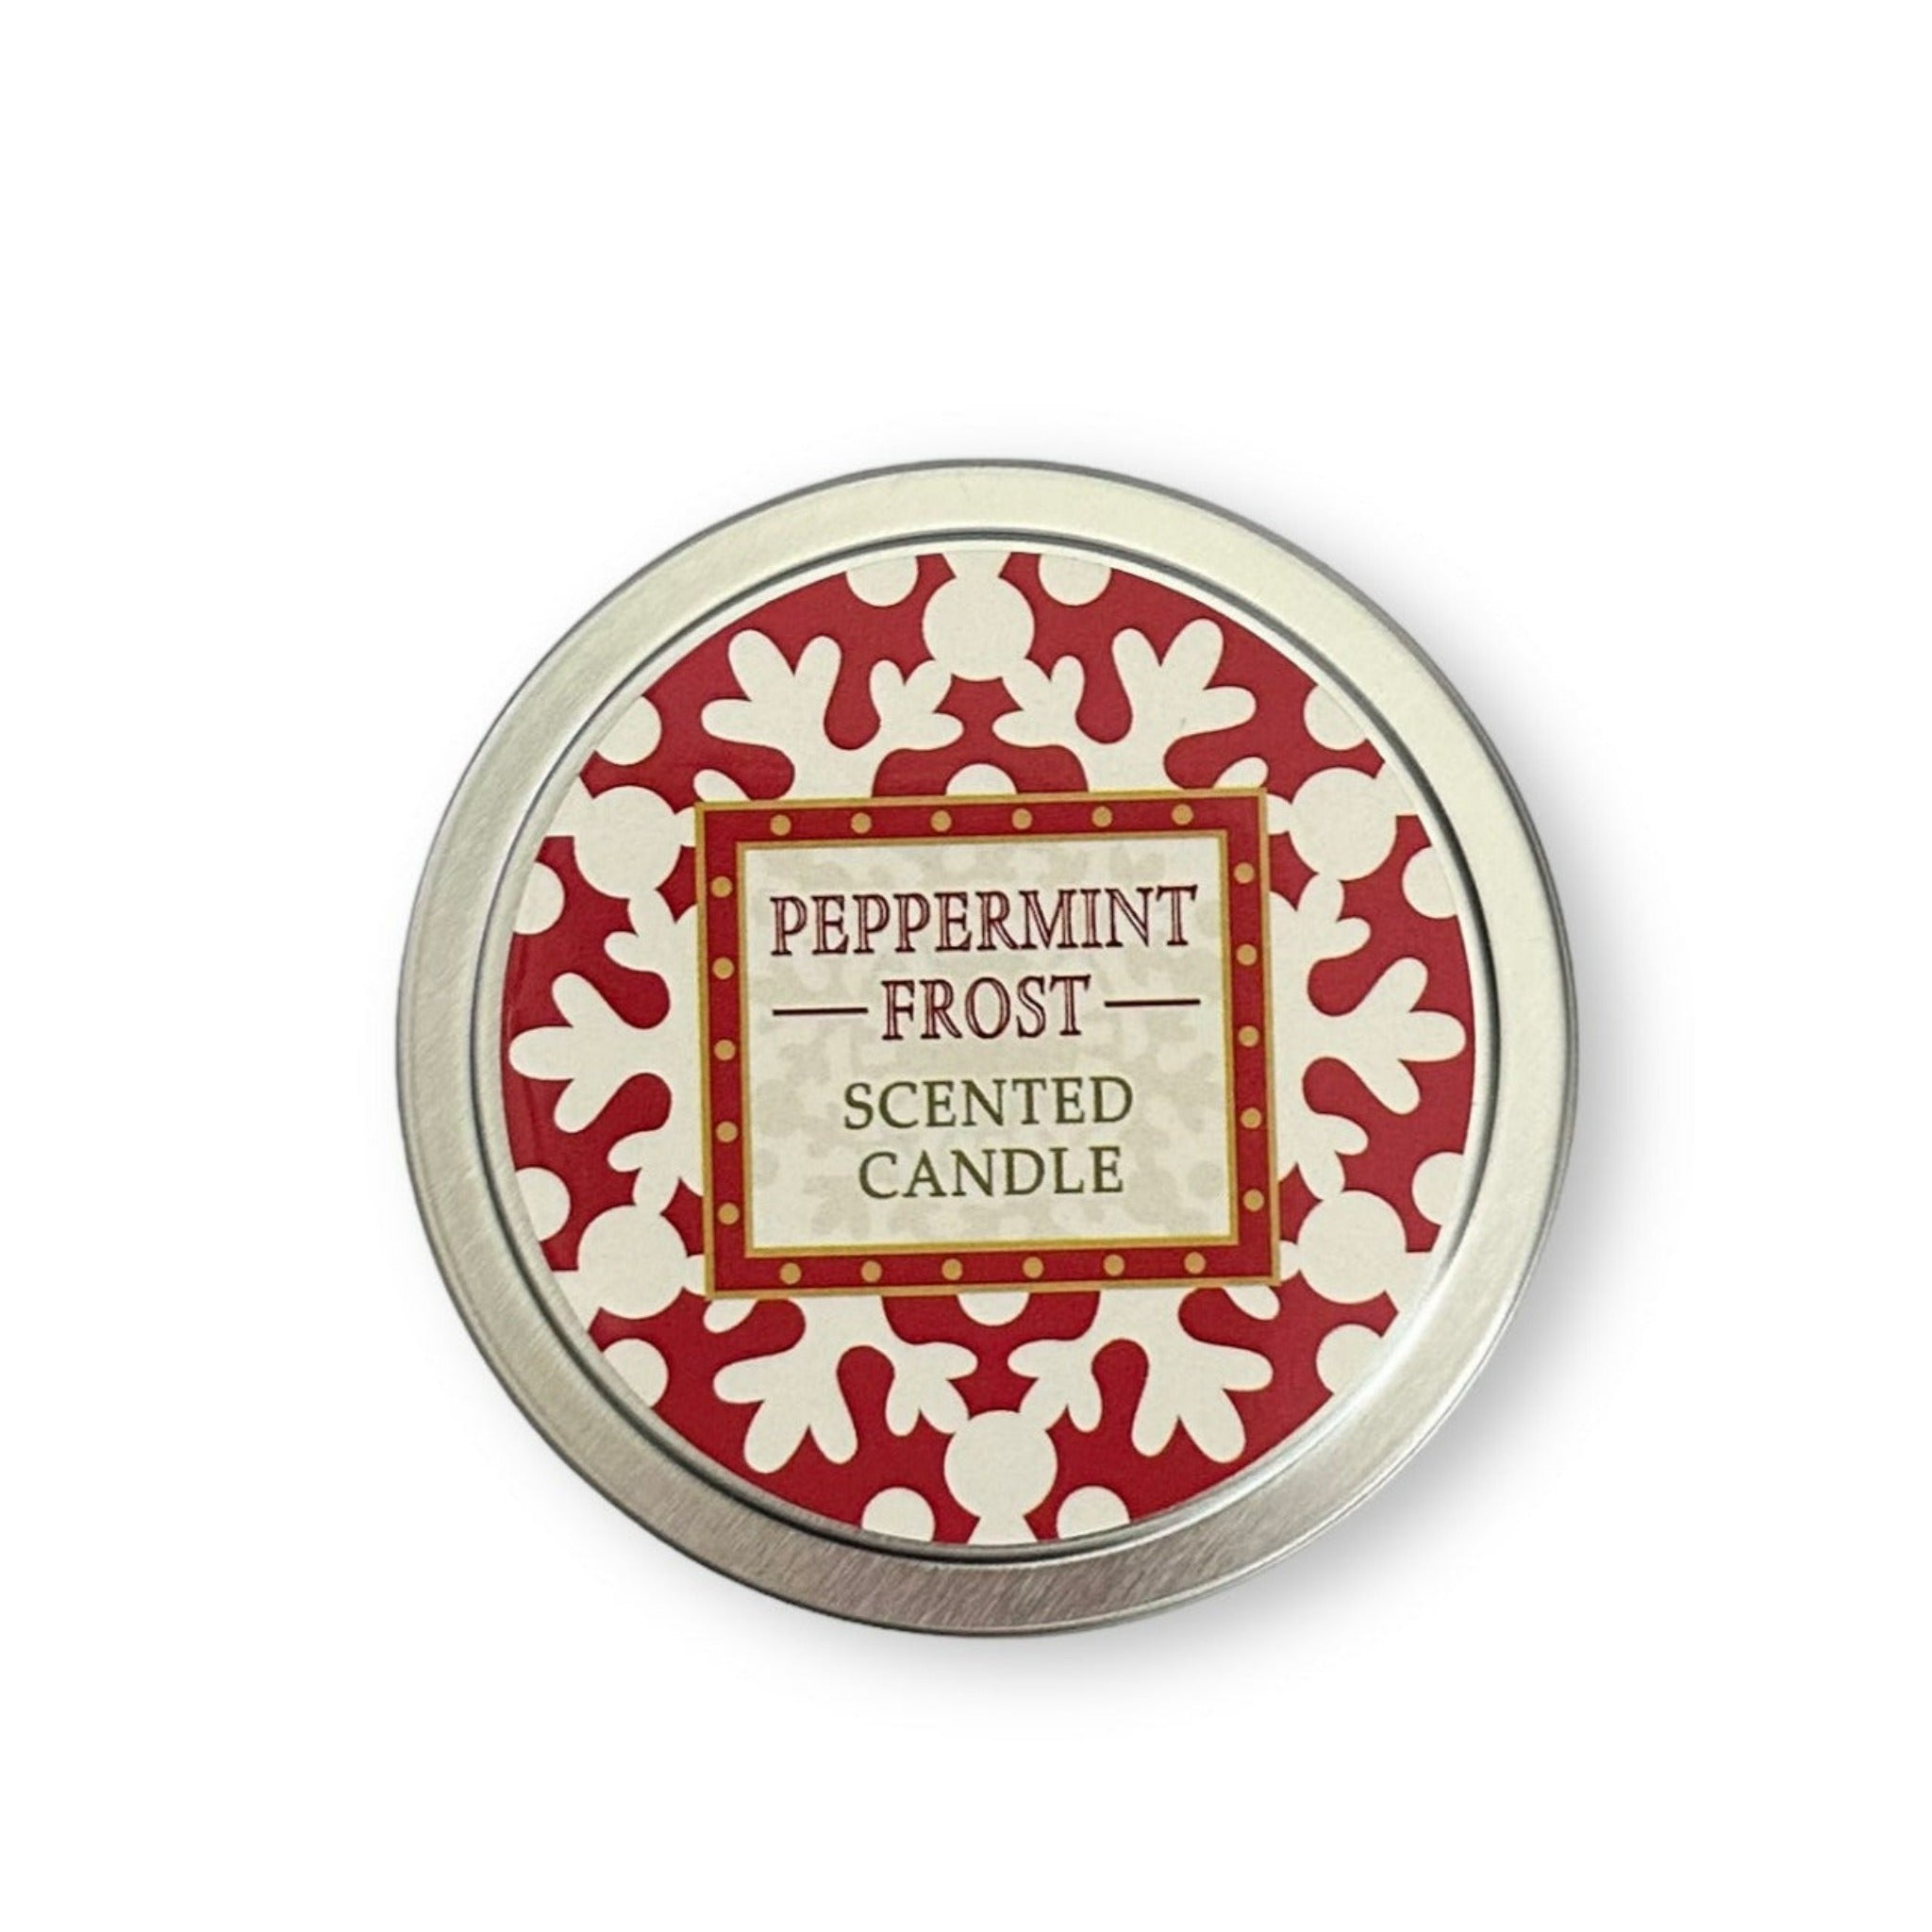 Greenwich Bay Trading Company Peppermint Frost Candle